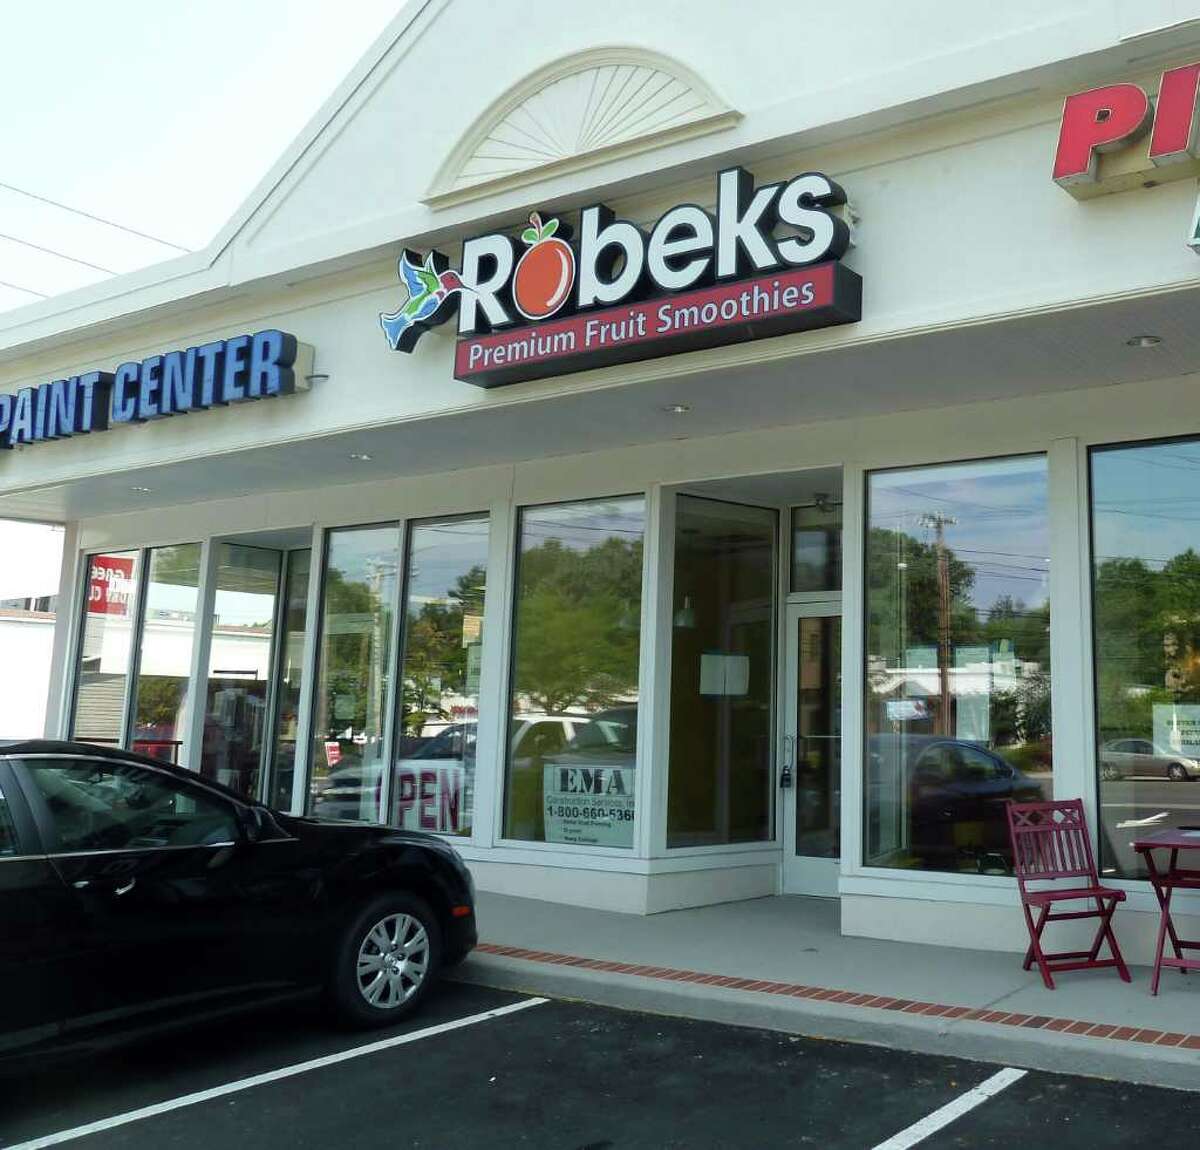 Robeks Premium Fruit Smoothies is slated to open Friday, Sept. 23, in the Black Rock Shopping Center, 2061 Black Rock Turnpike. A grand opening is scheduled for Sept. 30 to Oct. 1.